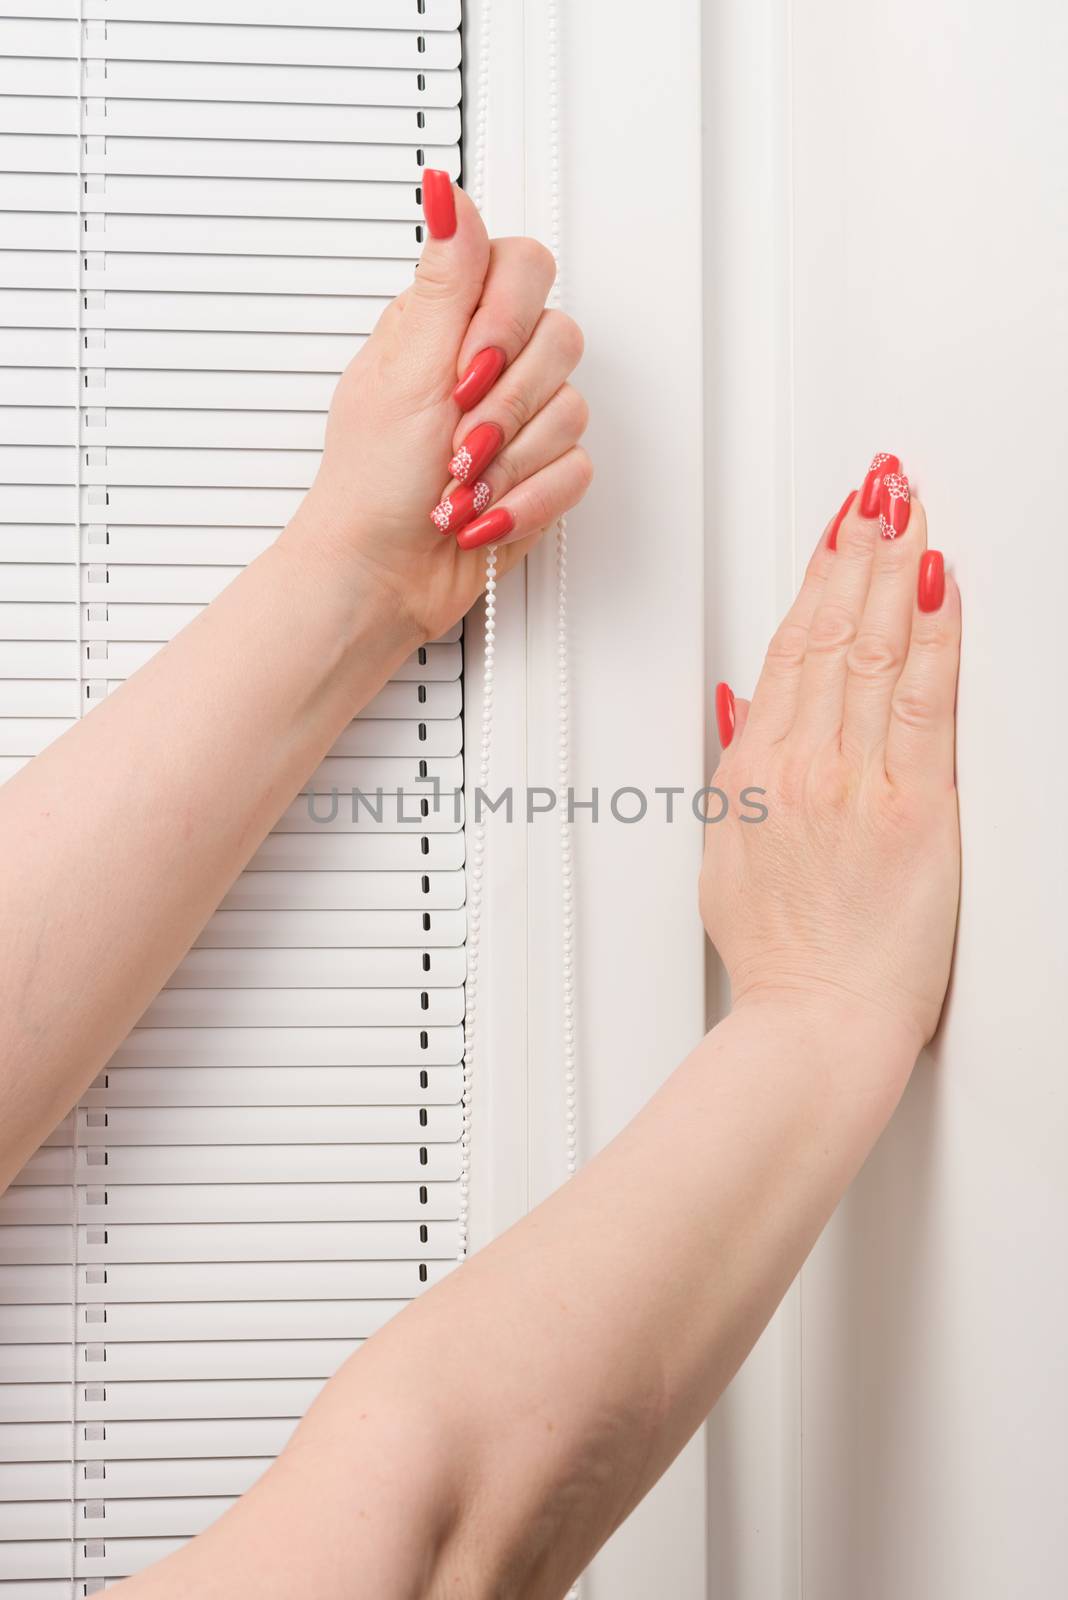 Female hands whith beauty manicure and blinds at window